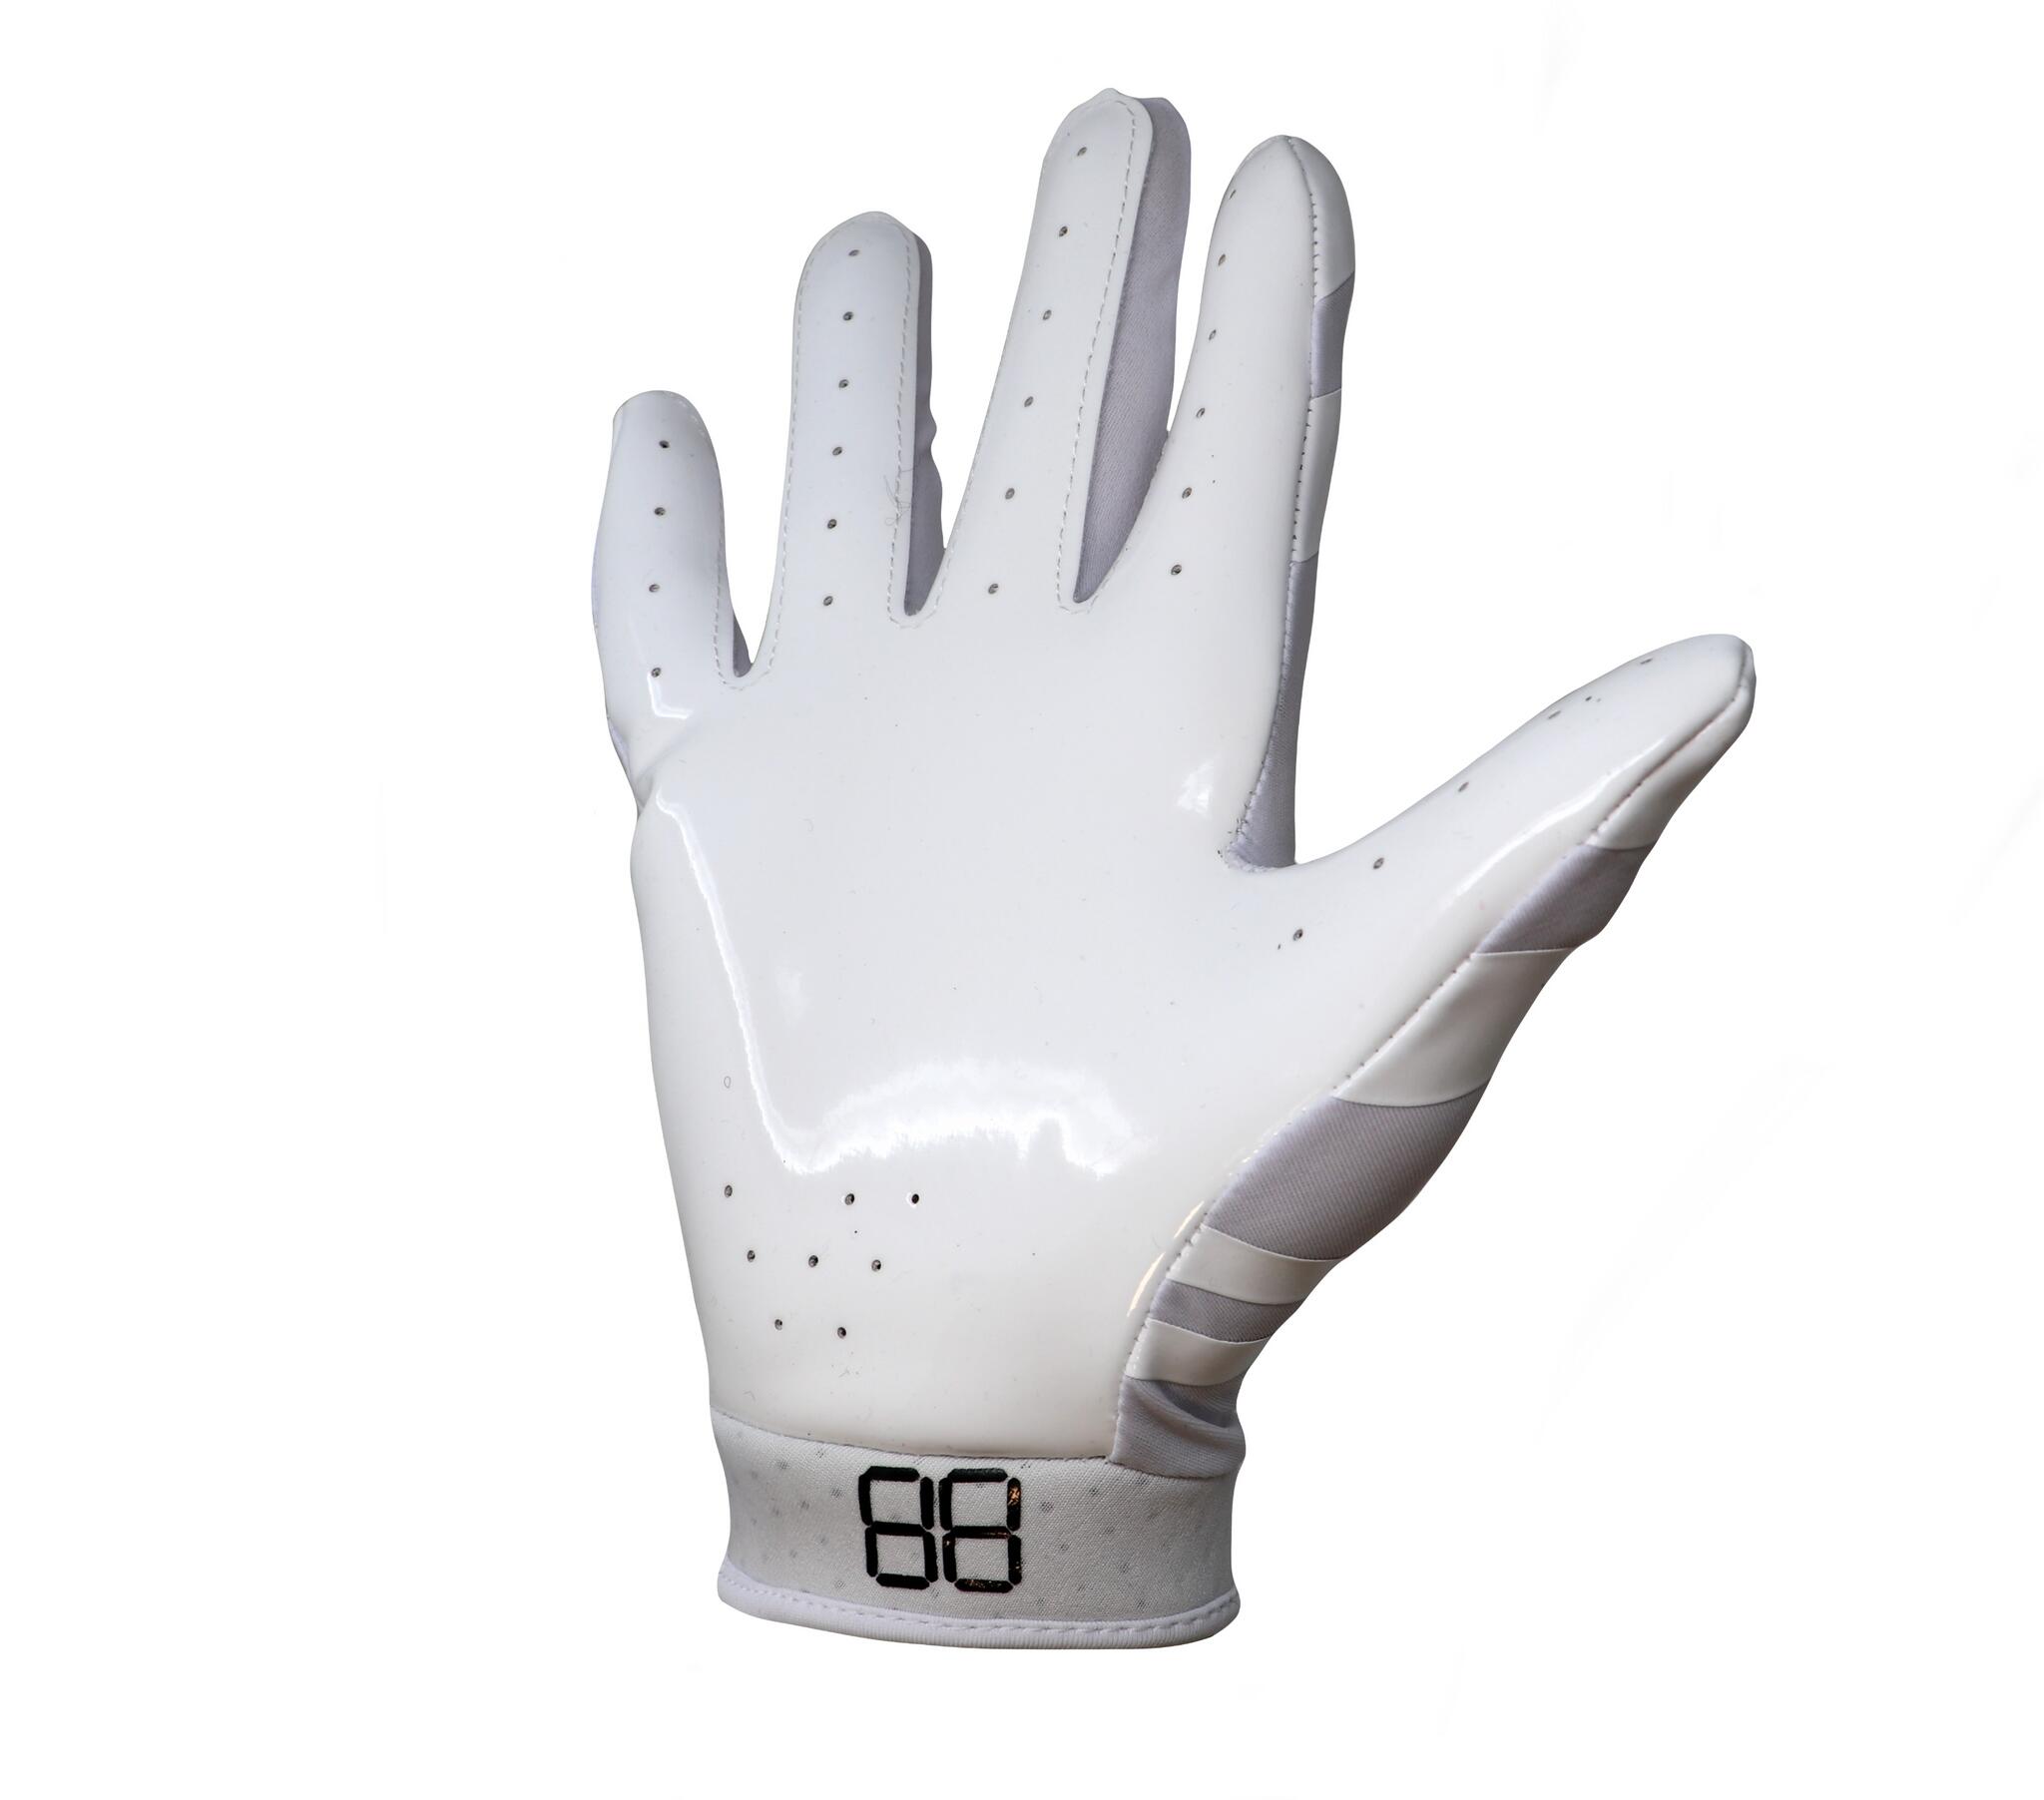  pro receiver american football gloves, RE, DB, RB, White FRG-03 3/4